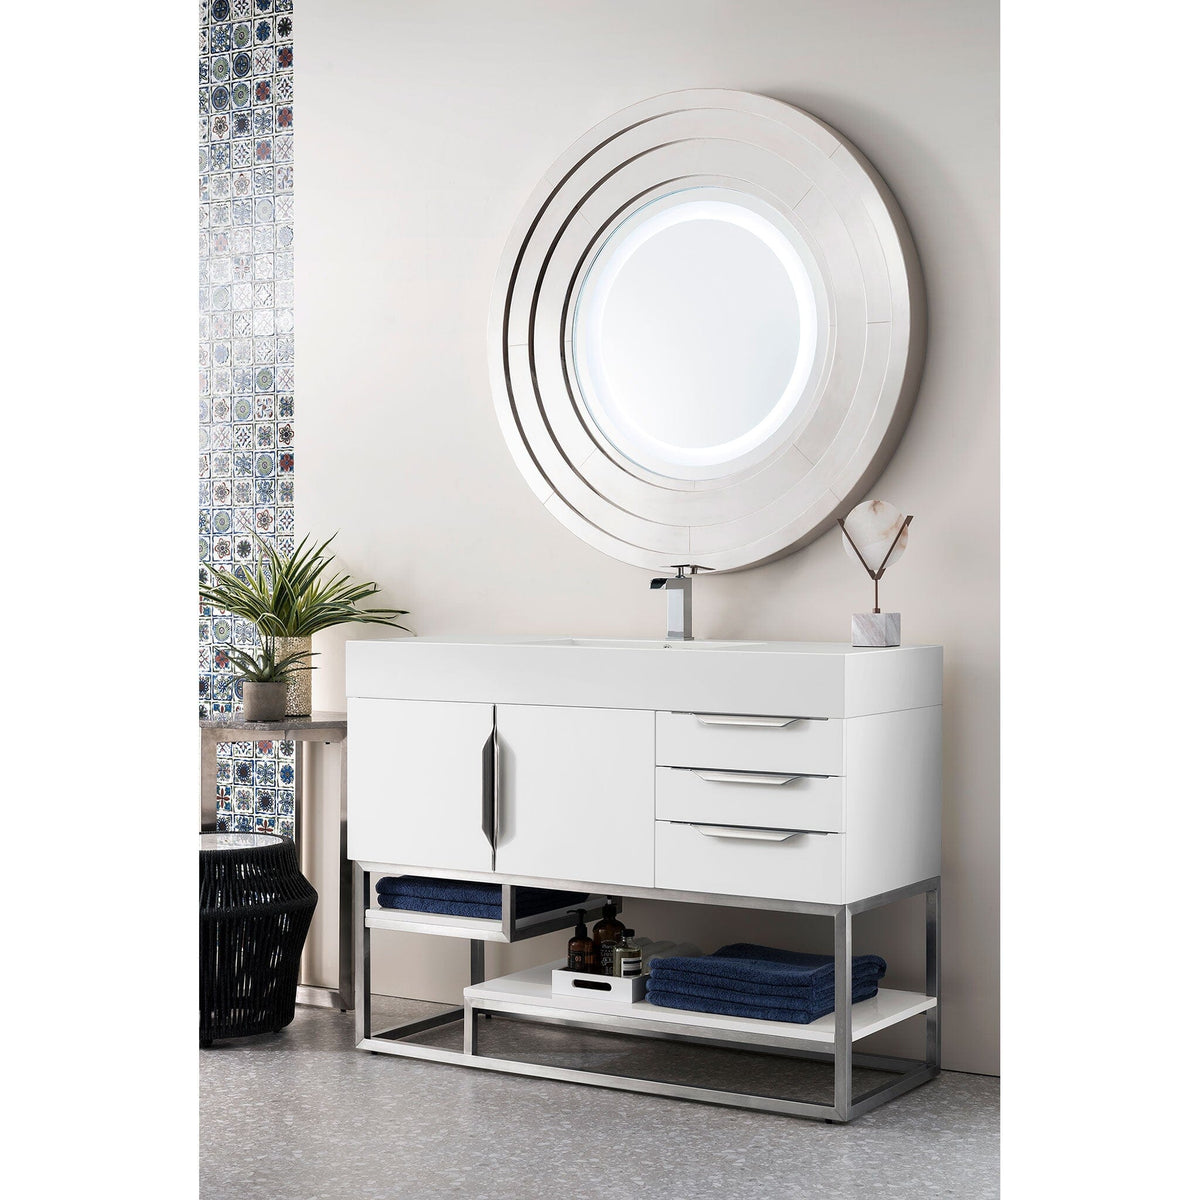 48" Columbia Single Bathroom Vanity, Glossy White w/ Brushed Nickel Base and Glossy White Composite Stone Top